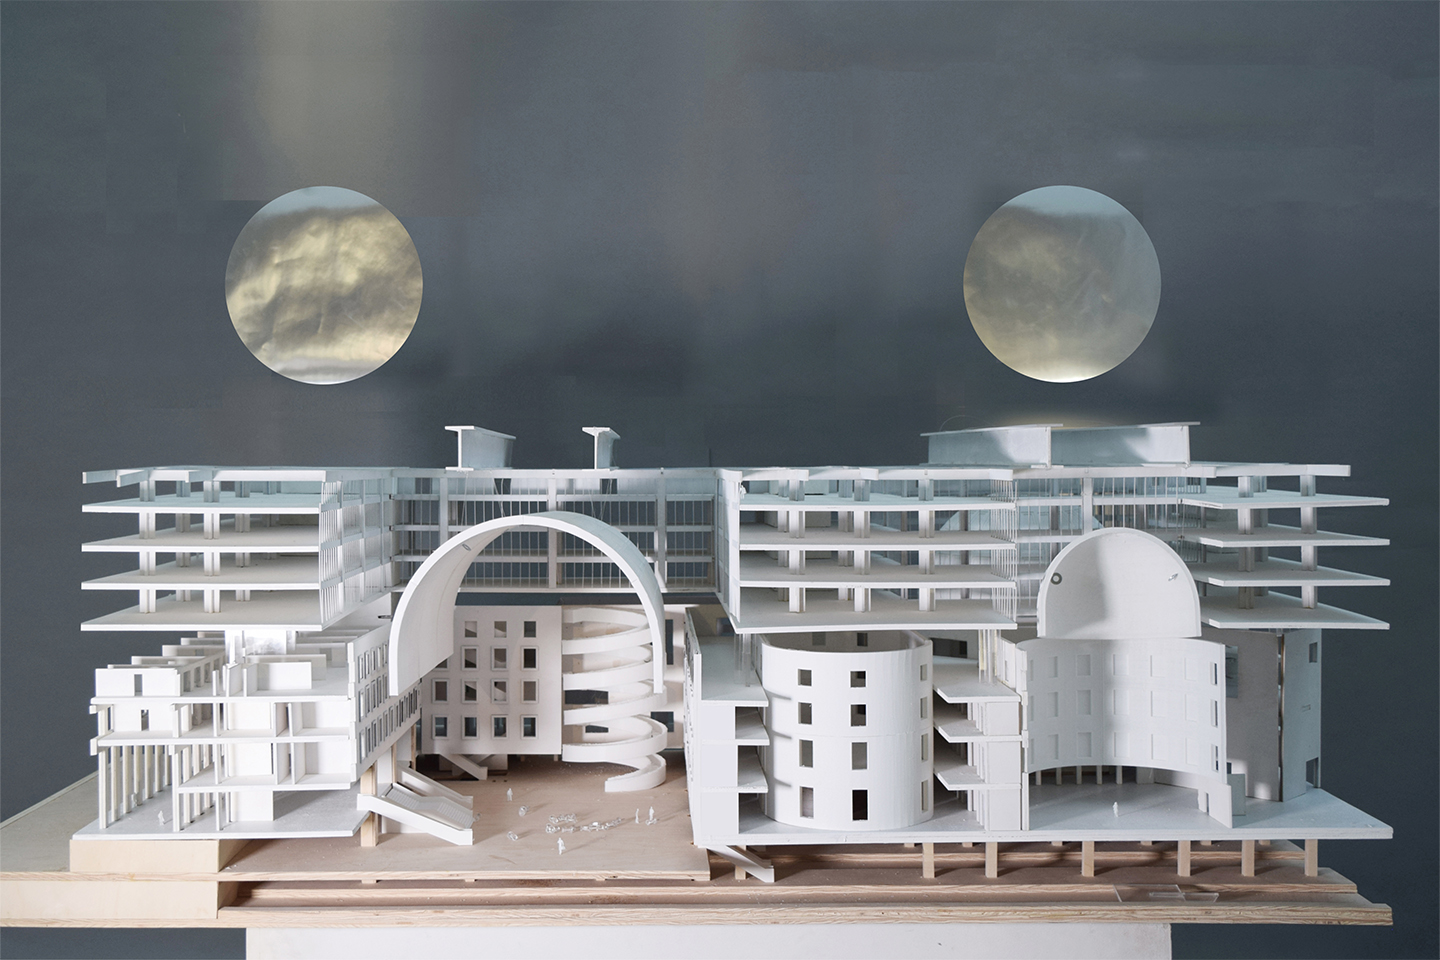 Model of Room City, a project from Li's time teaching at the Rice School of Architecture